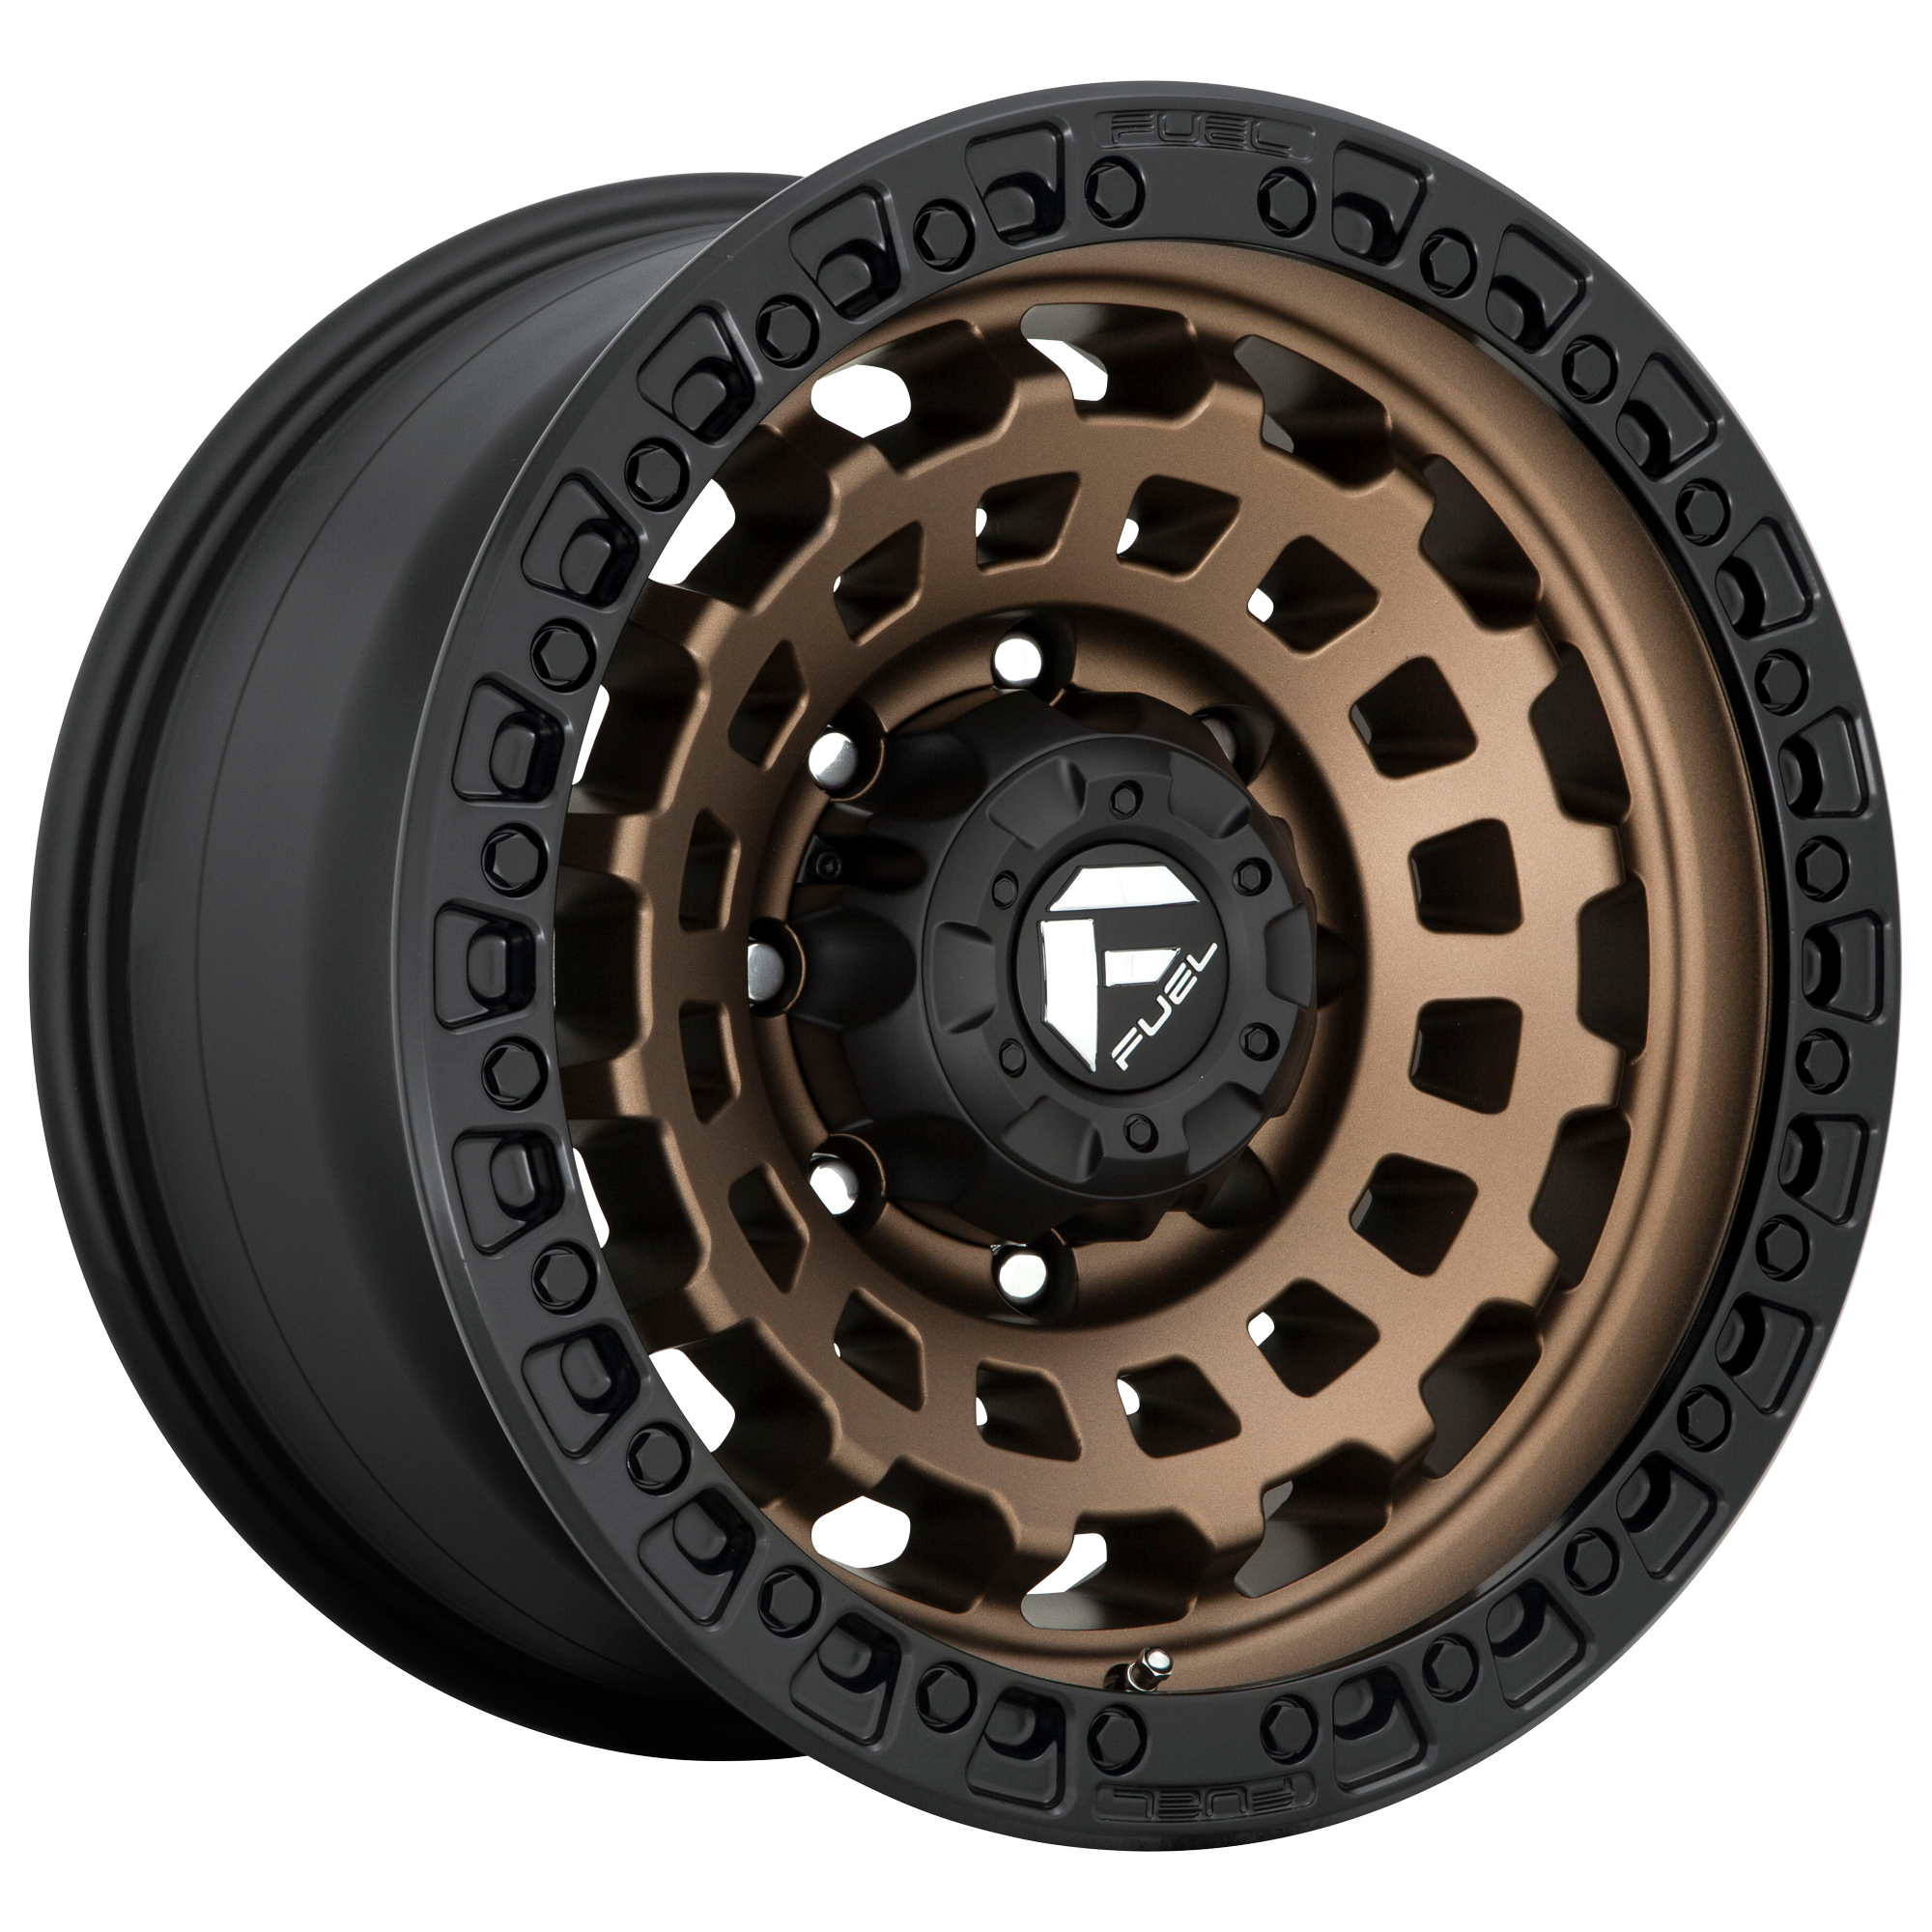 ZEPHYR 18x9 8x170.00 MATTE BRONZE BLACK BEAD RING (-12 mm) - Tires and Engine Performance